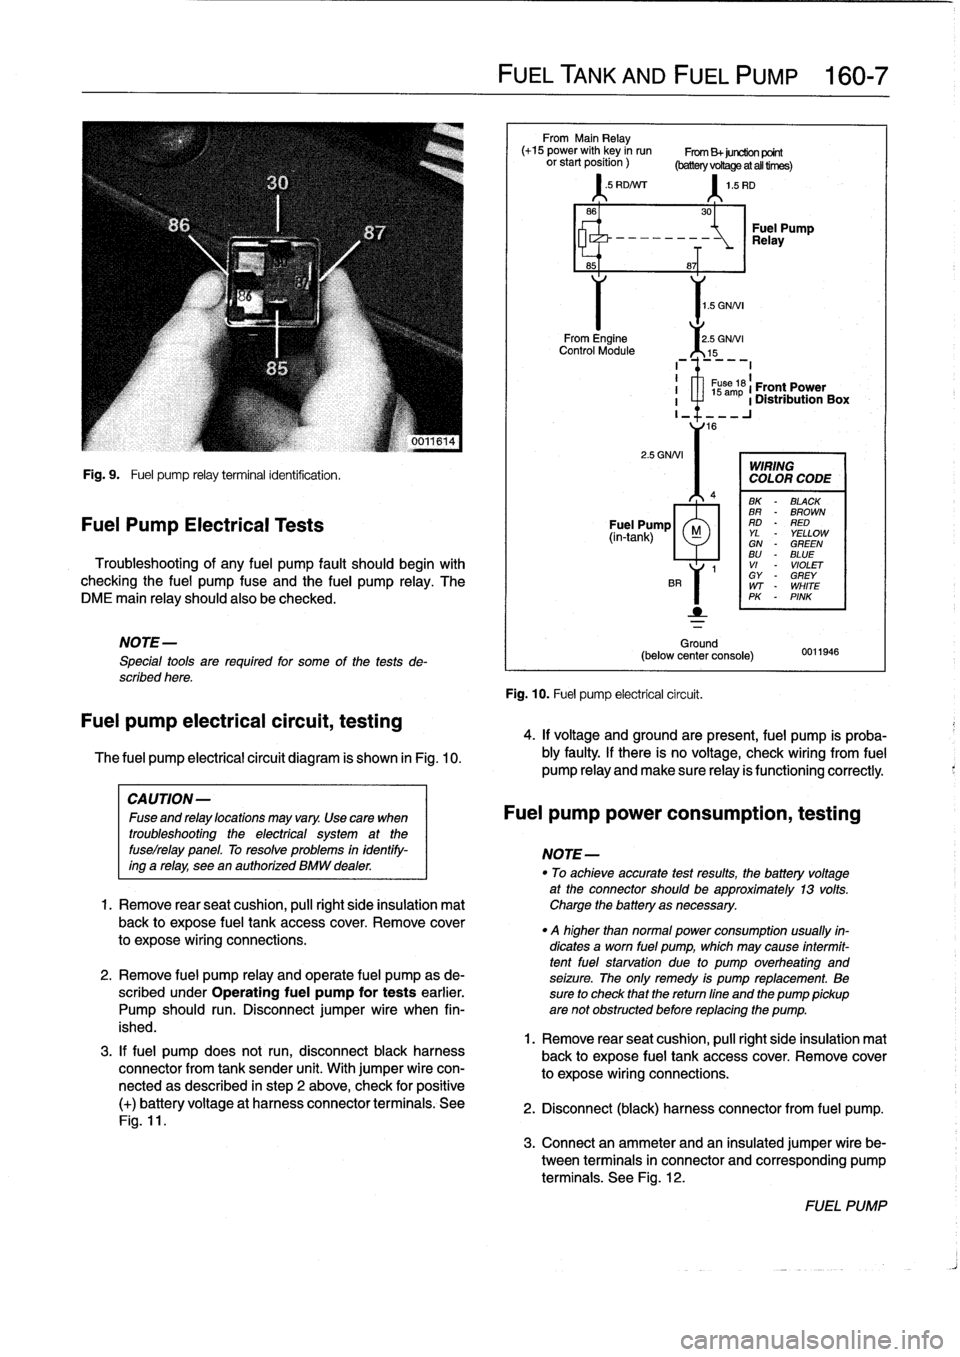 BMW 325i 1998 E36 Workshop Manual 
Fig
.
9
.

	

Fuel
pump
relay
terminal
identification
.

Fuel
Pump
Electrical
Tests

Troubleshooting
of
any
fuel
pump
fault
should
begin
with

checking
the
fuel
pump
fuse
and
the
fuel
pump
relay
.
Th